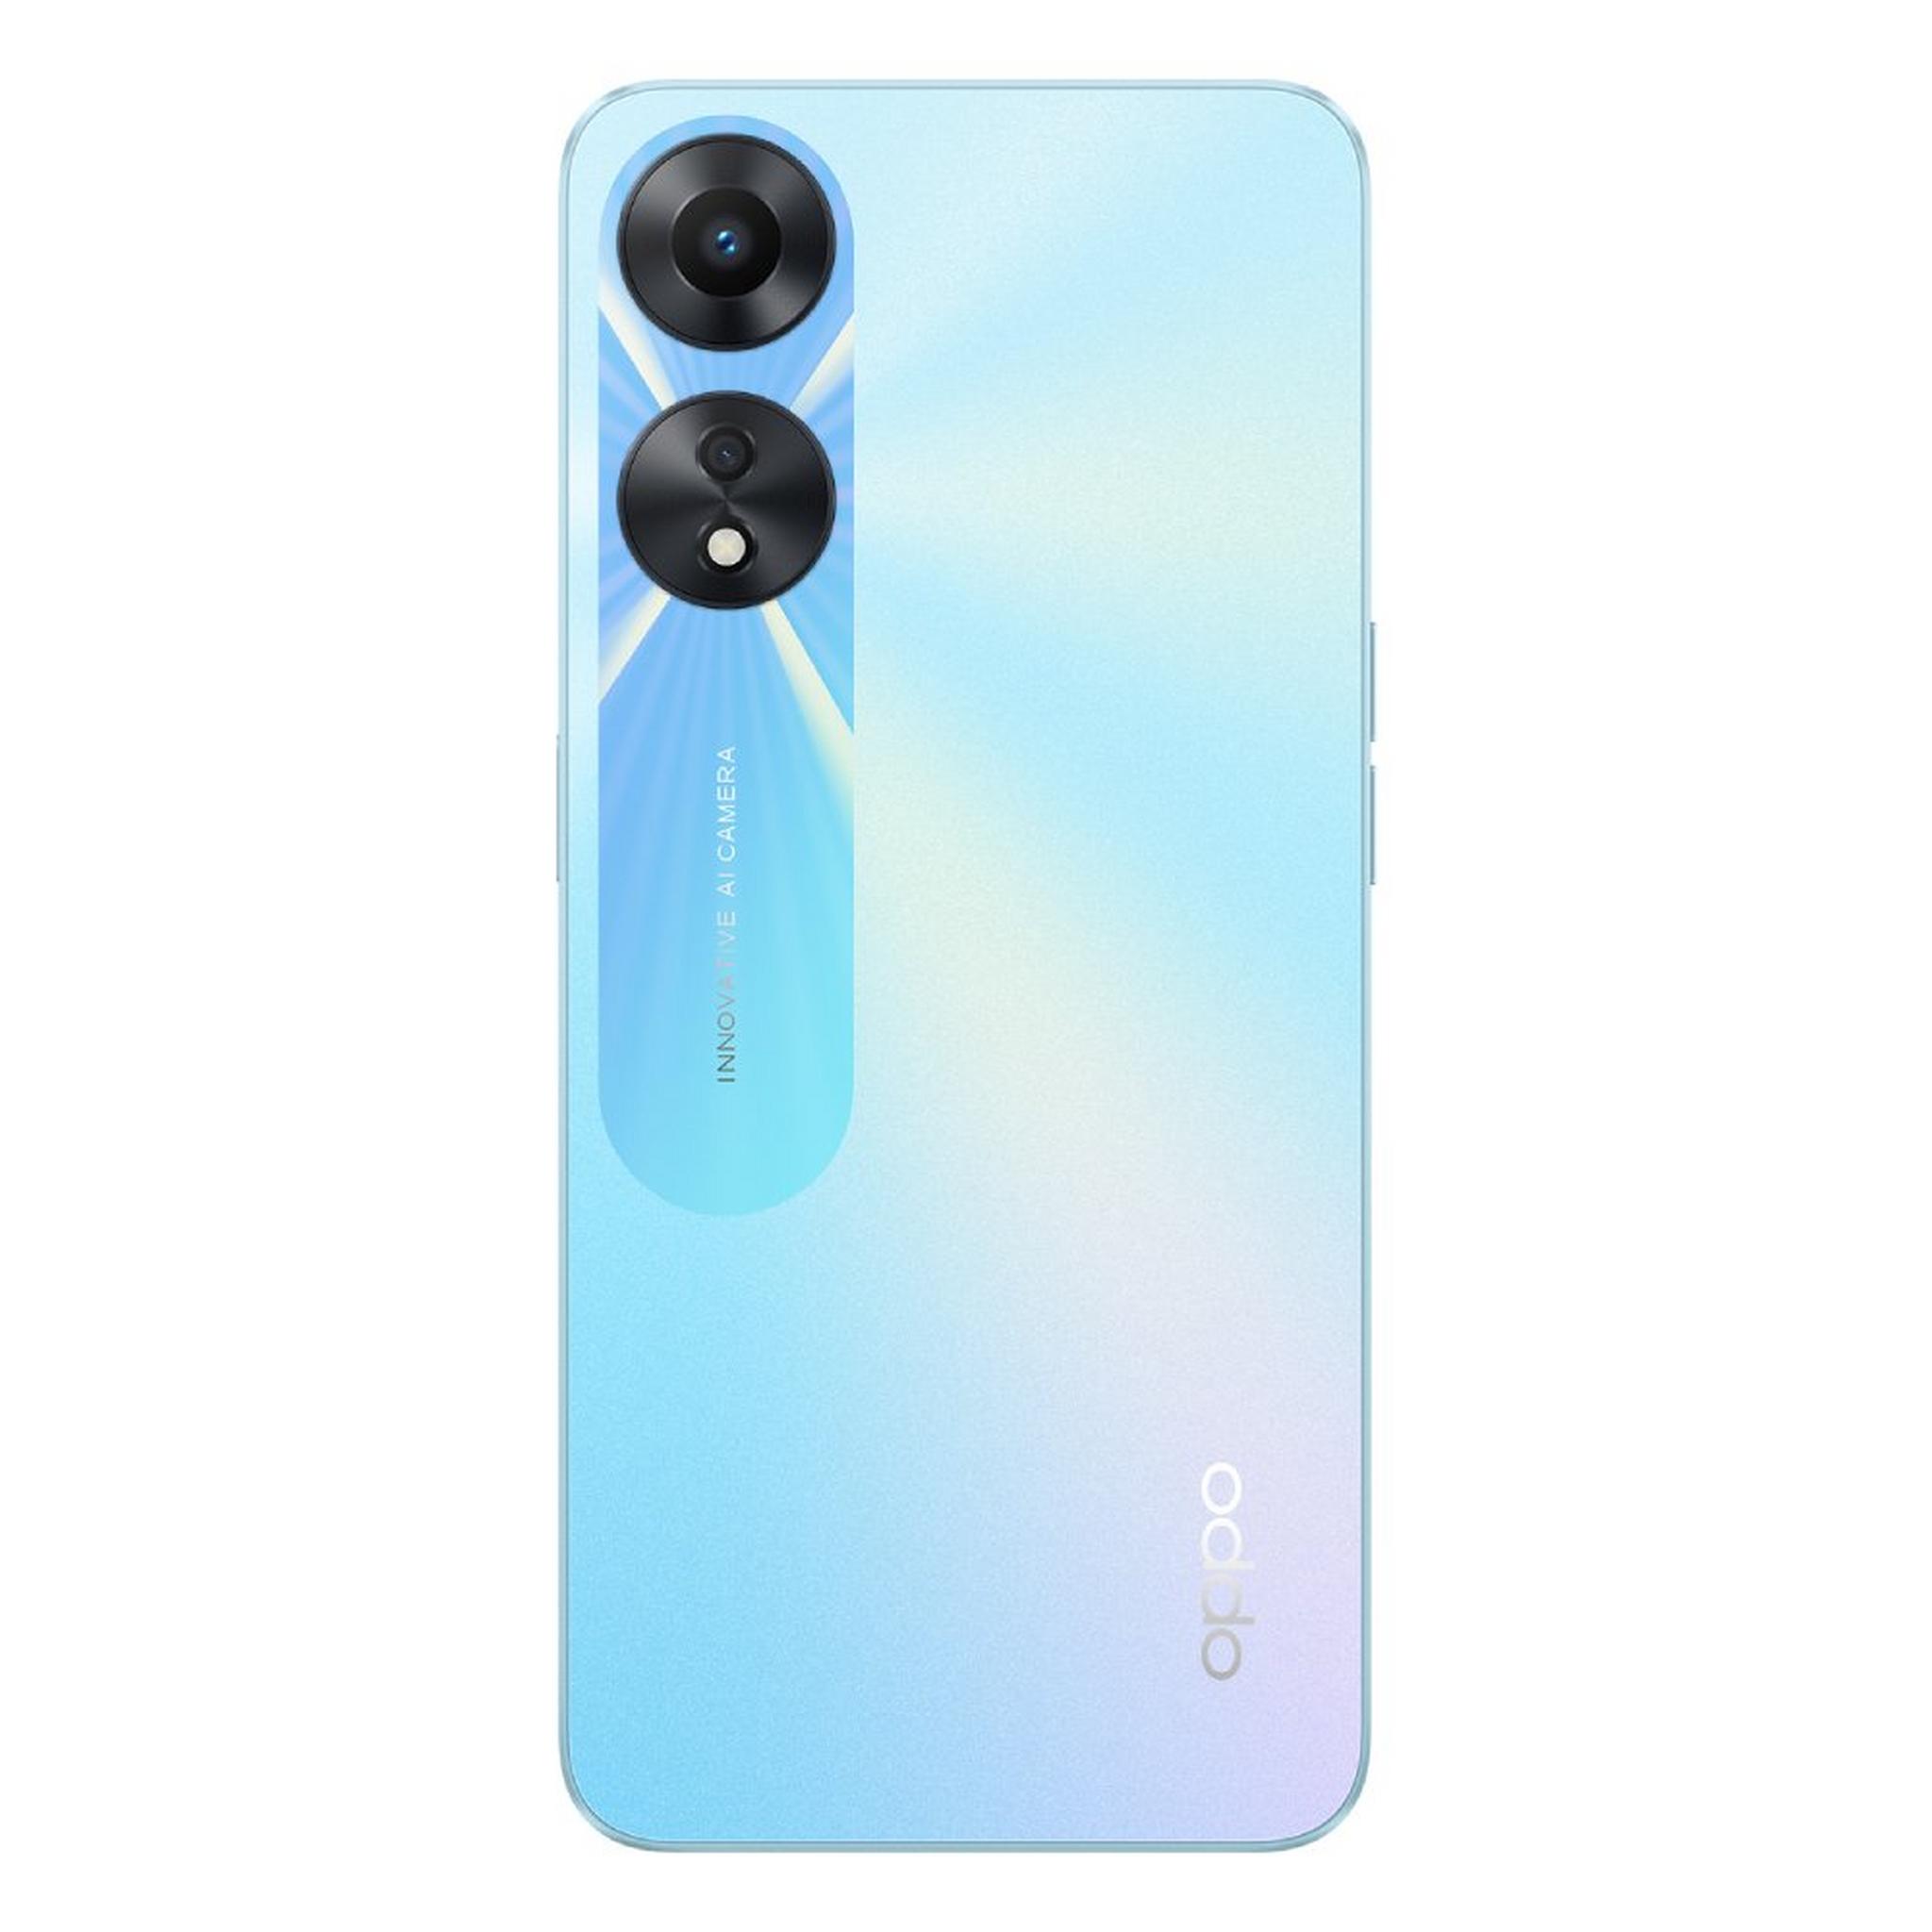 Oppo A78 128GB Phone - Glowing Blue